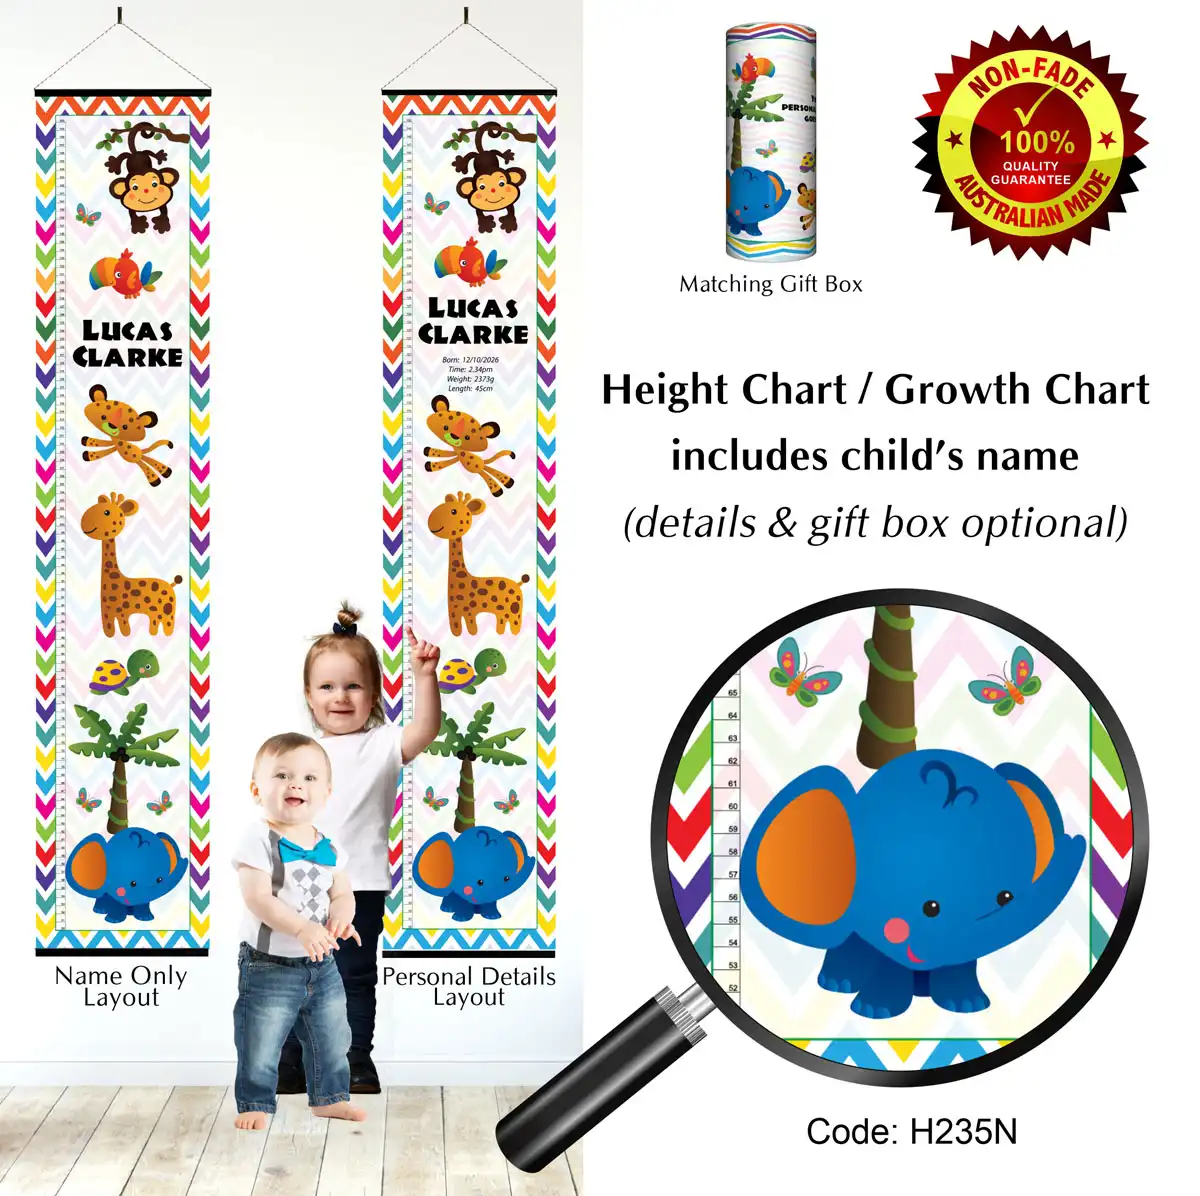 Height Charts - Jungle Animal with Chevron Pattern #1